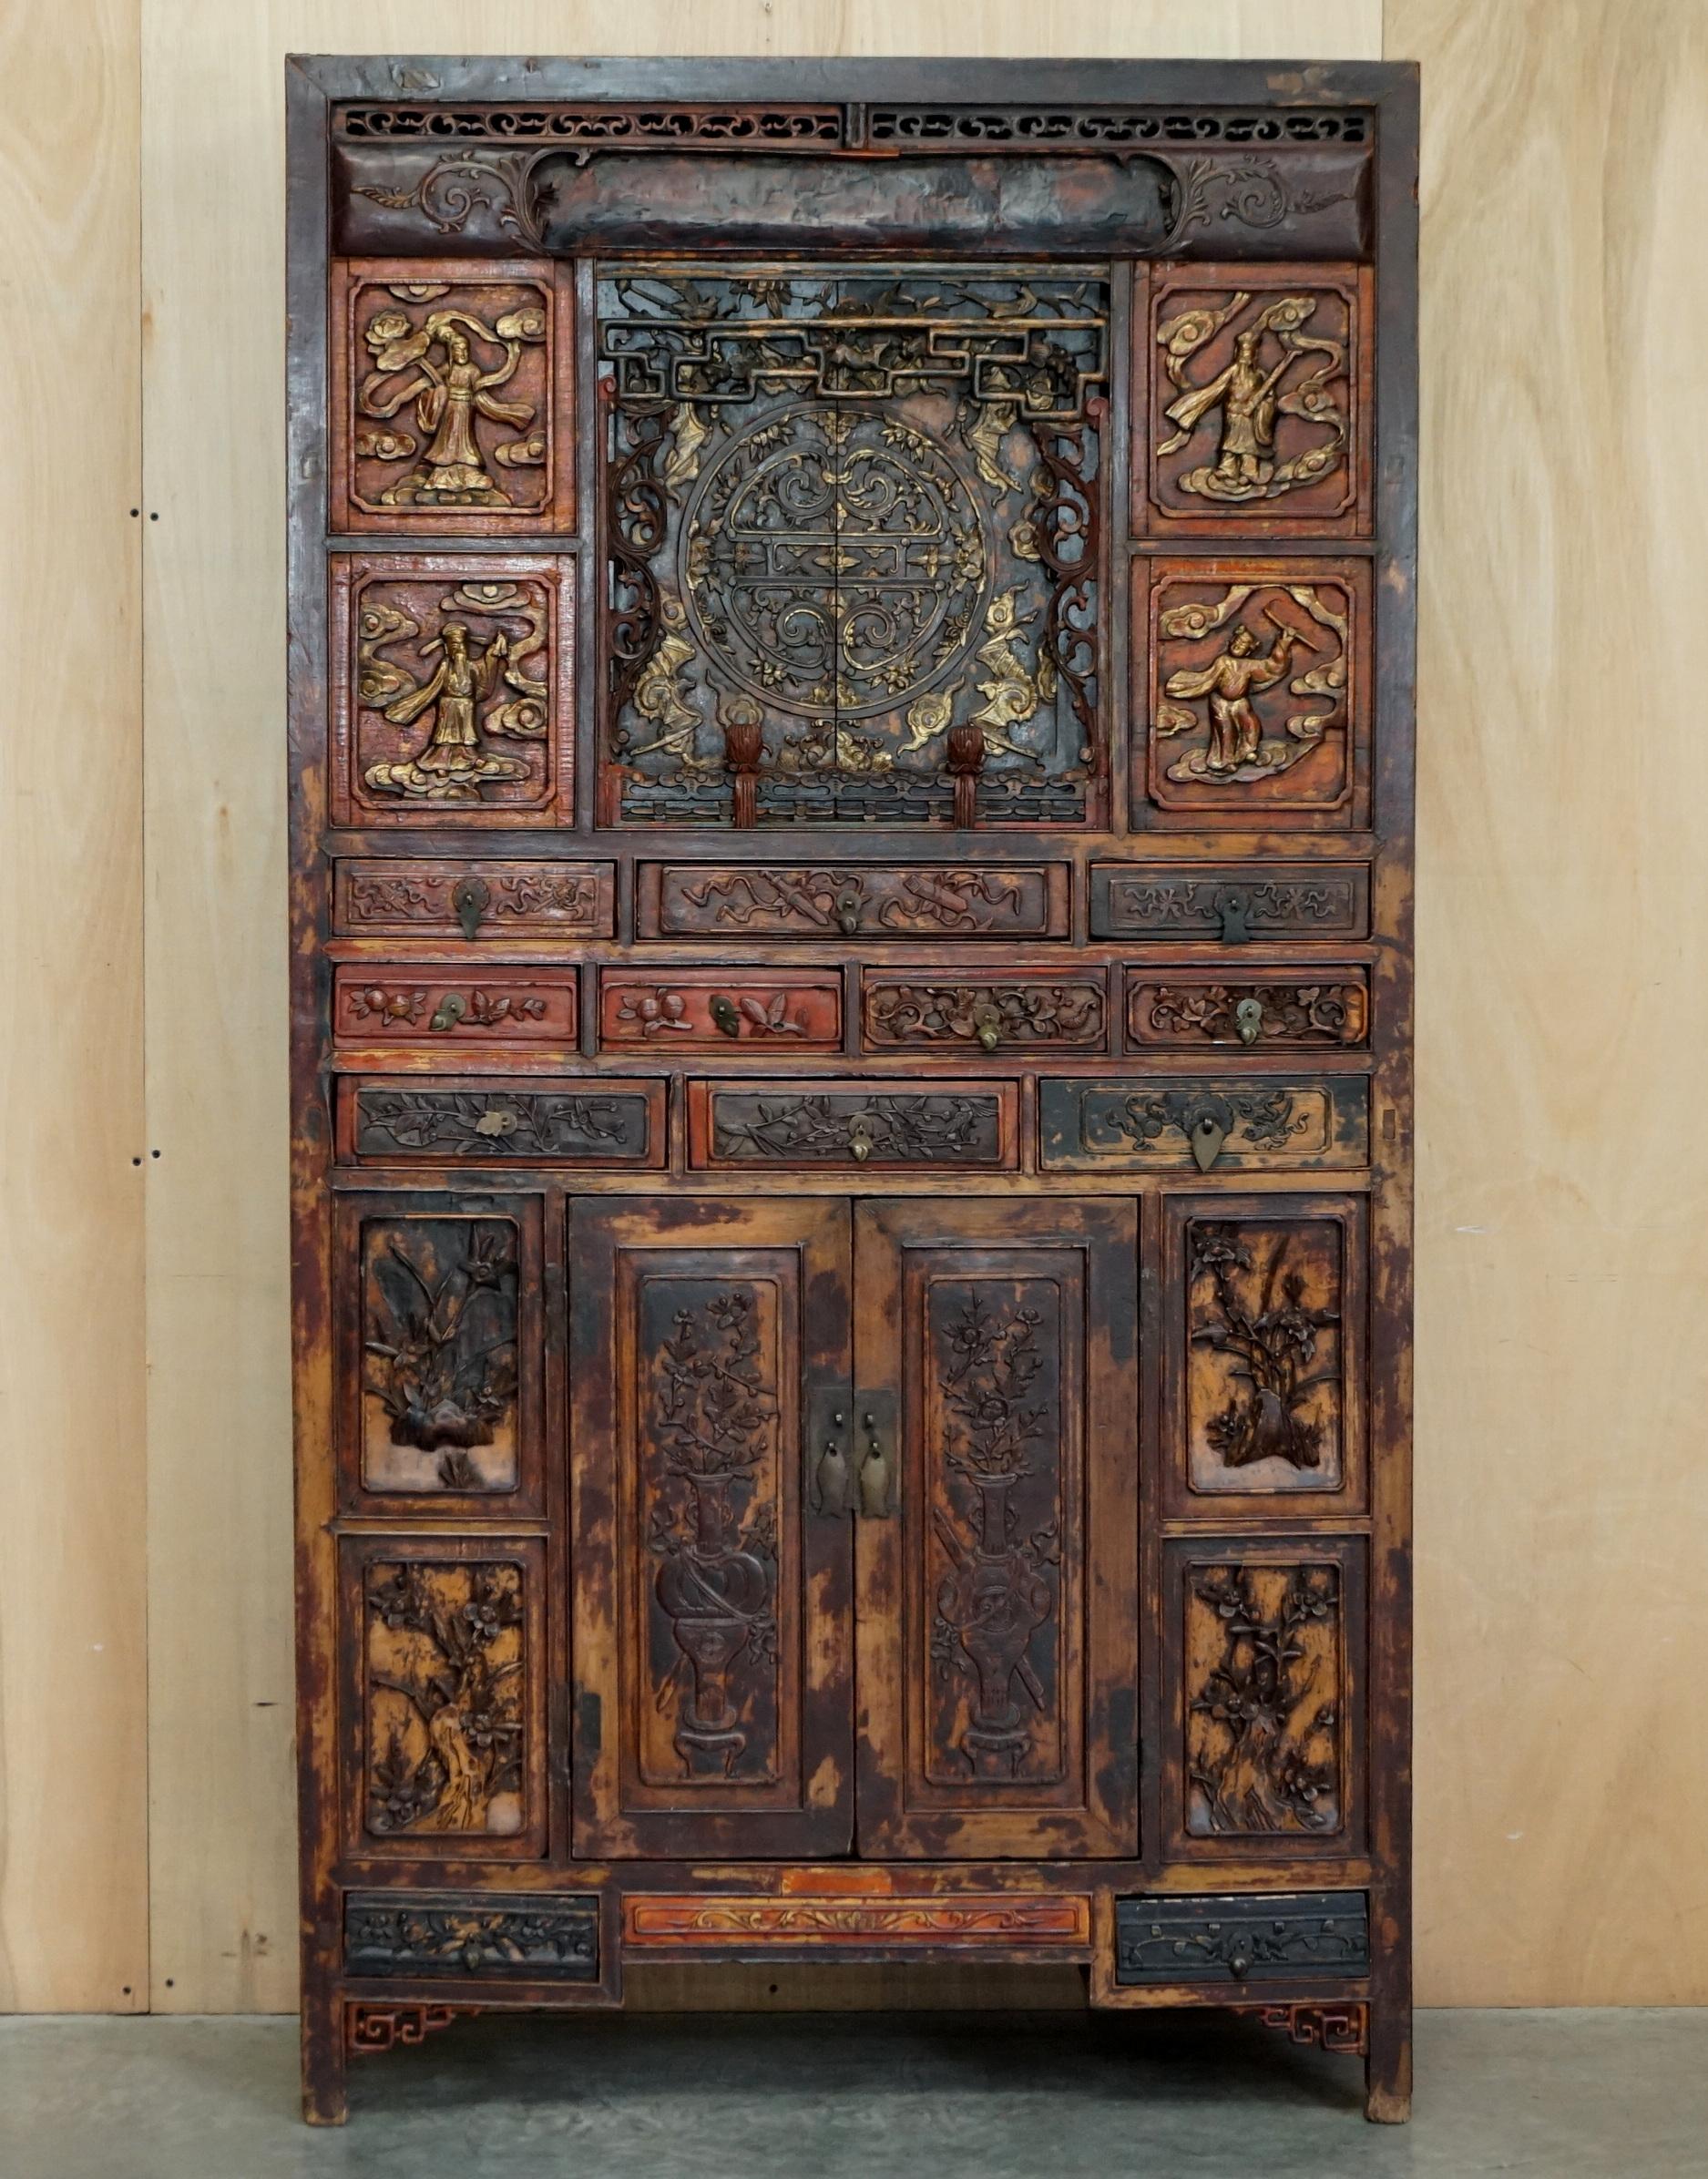 We are delighted to offer for sale this lovely antique circa 1860 hand painted and lacquered Chinese Wedding cupboard for folded linens etc

A very good looking and well made piece, these are now highly collectable as art furniture. This was has a